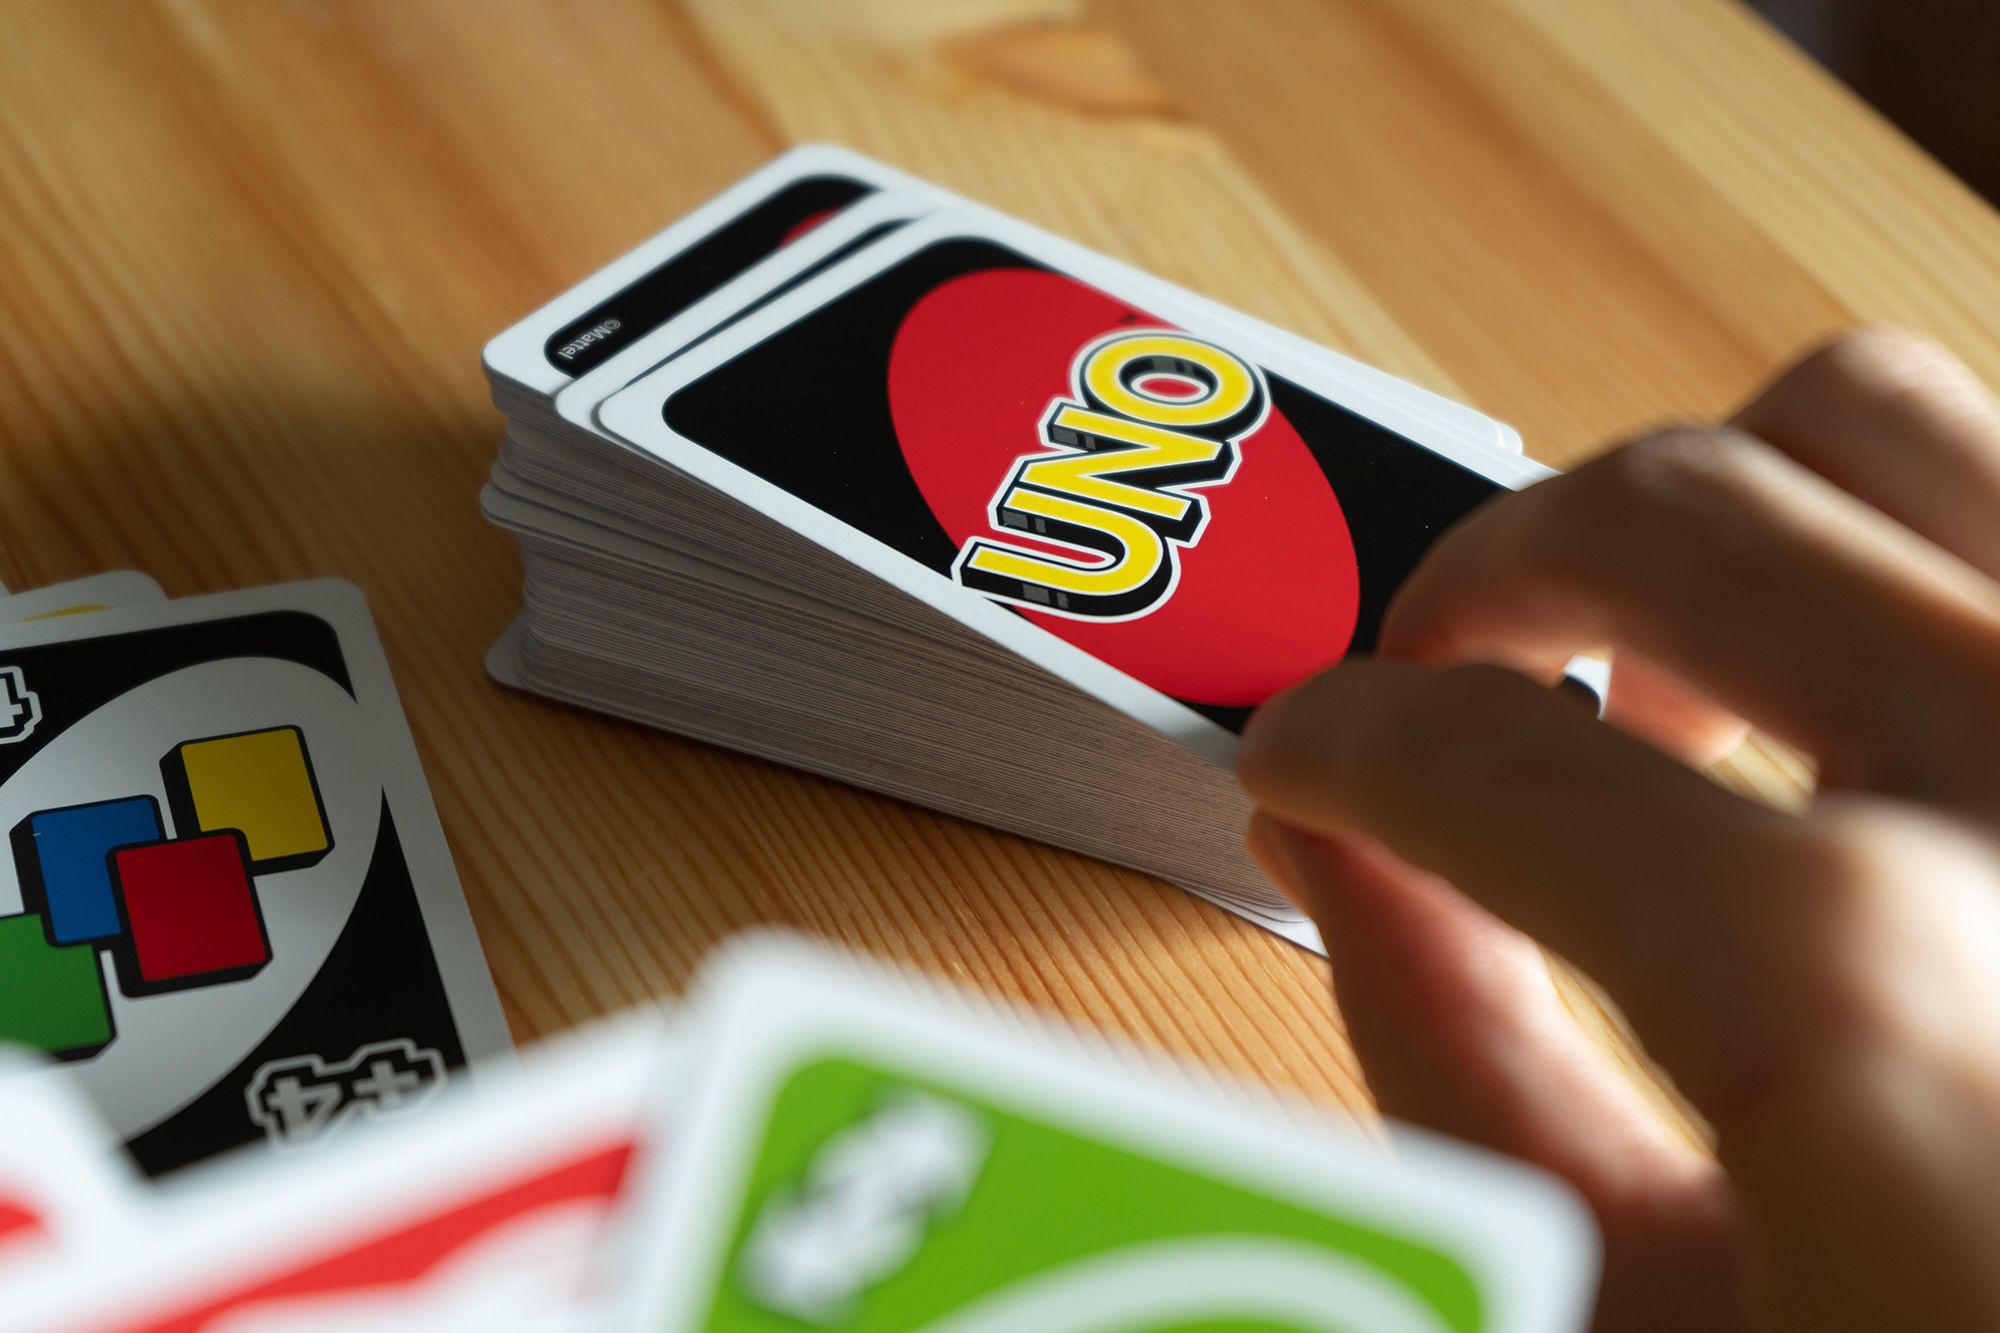 UNO Game - Play with friends (Early Access)